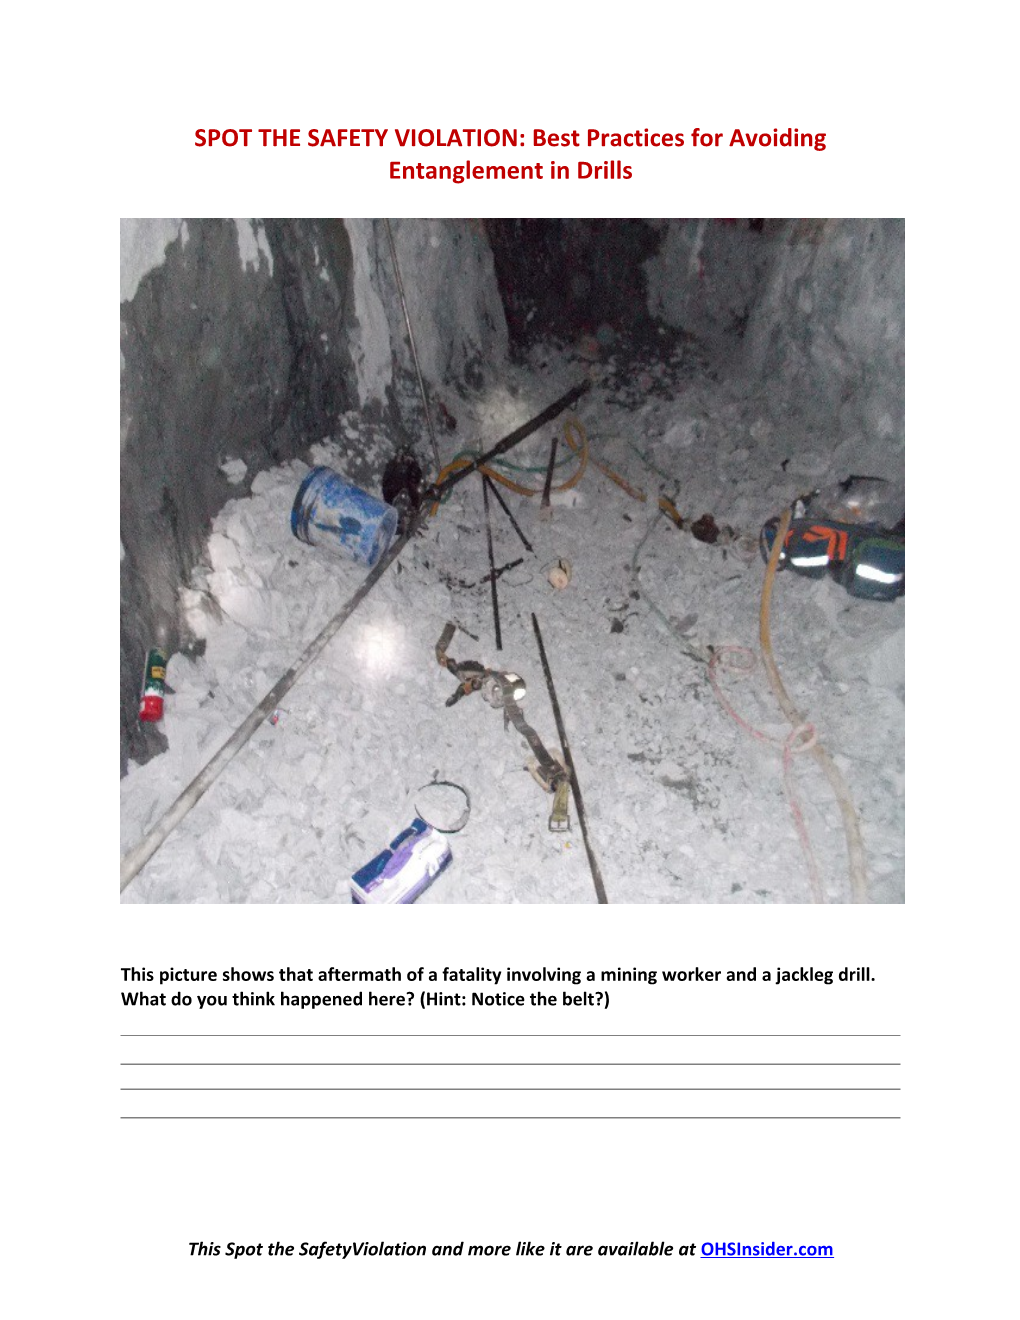 SPOT the SAFETY VIOLATION: Best Practices for Avoiding Entanglement in Drills